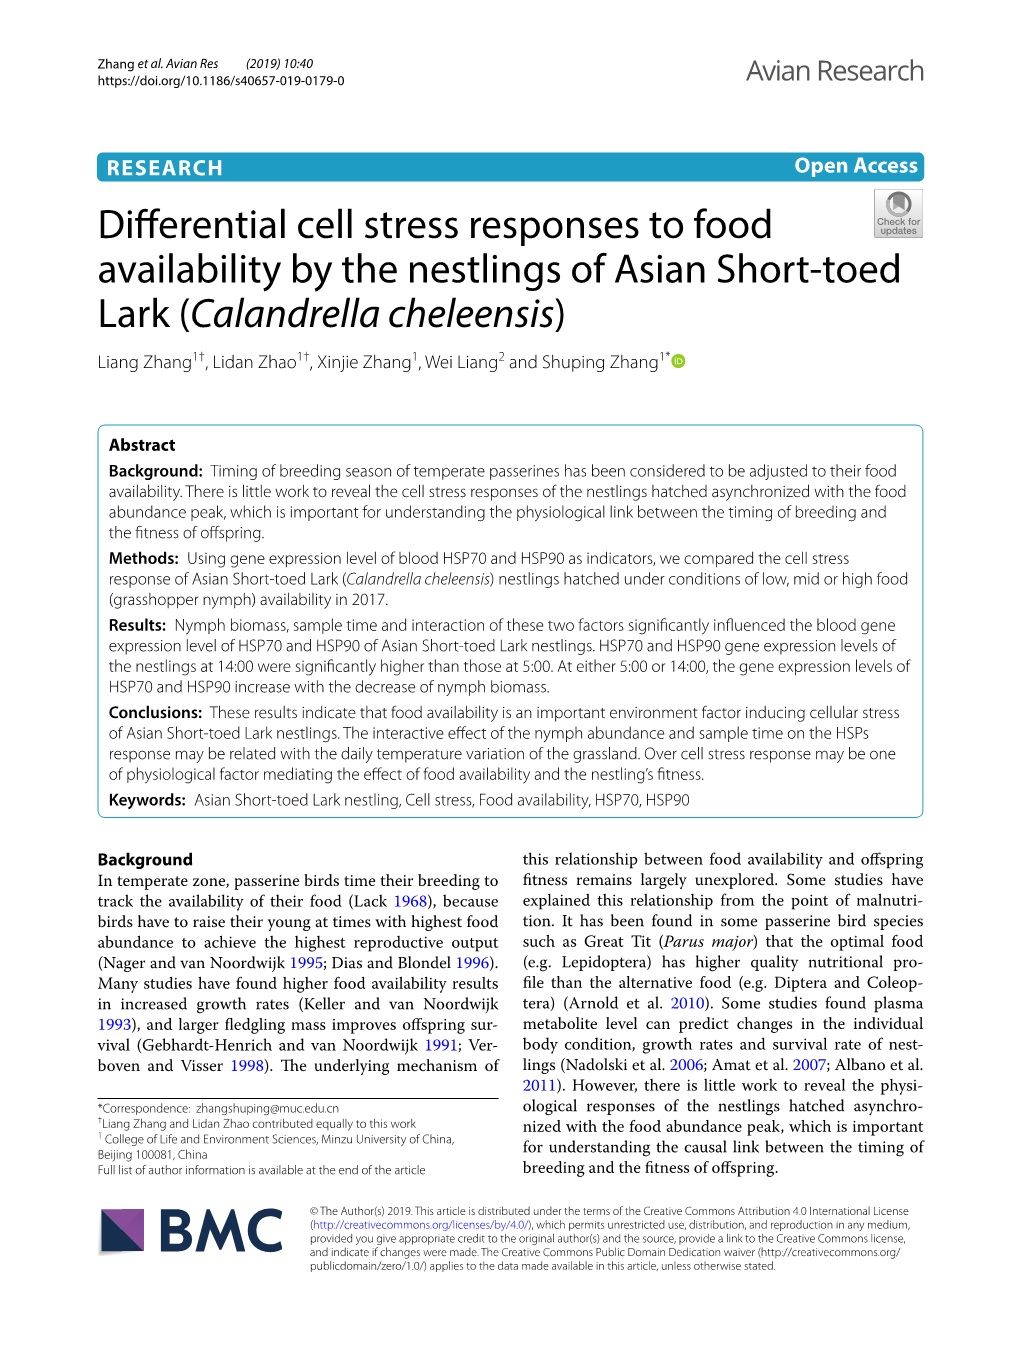 Differential Cell Stress Responses to Food Availability by the Nestlings Of